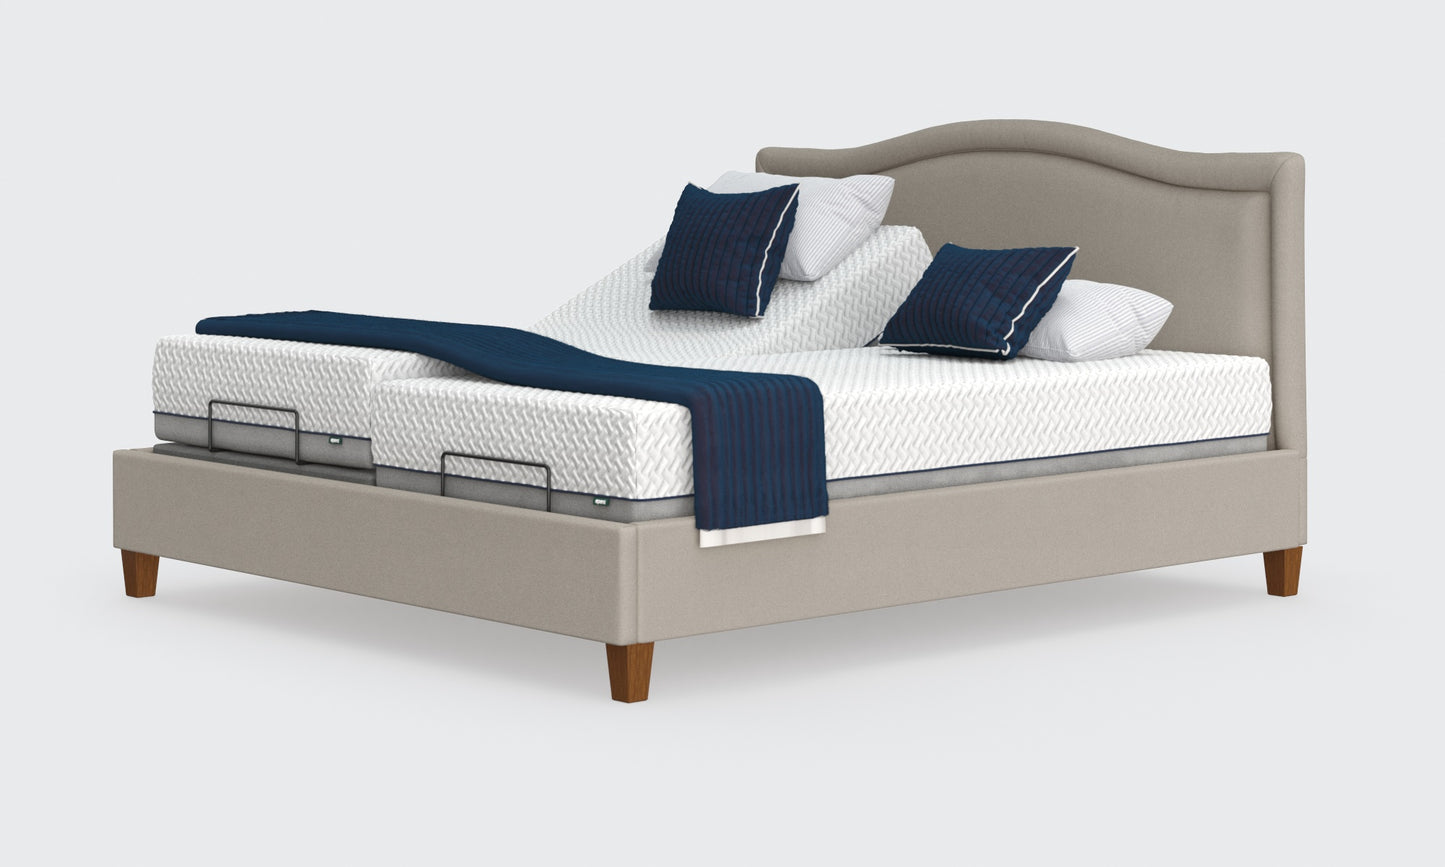 Flyte 6ft bed and mattress in the linen material with the pearl headboard